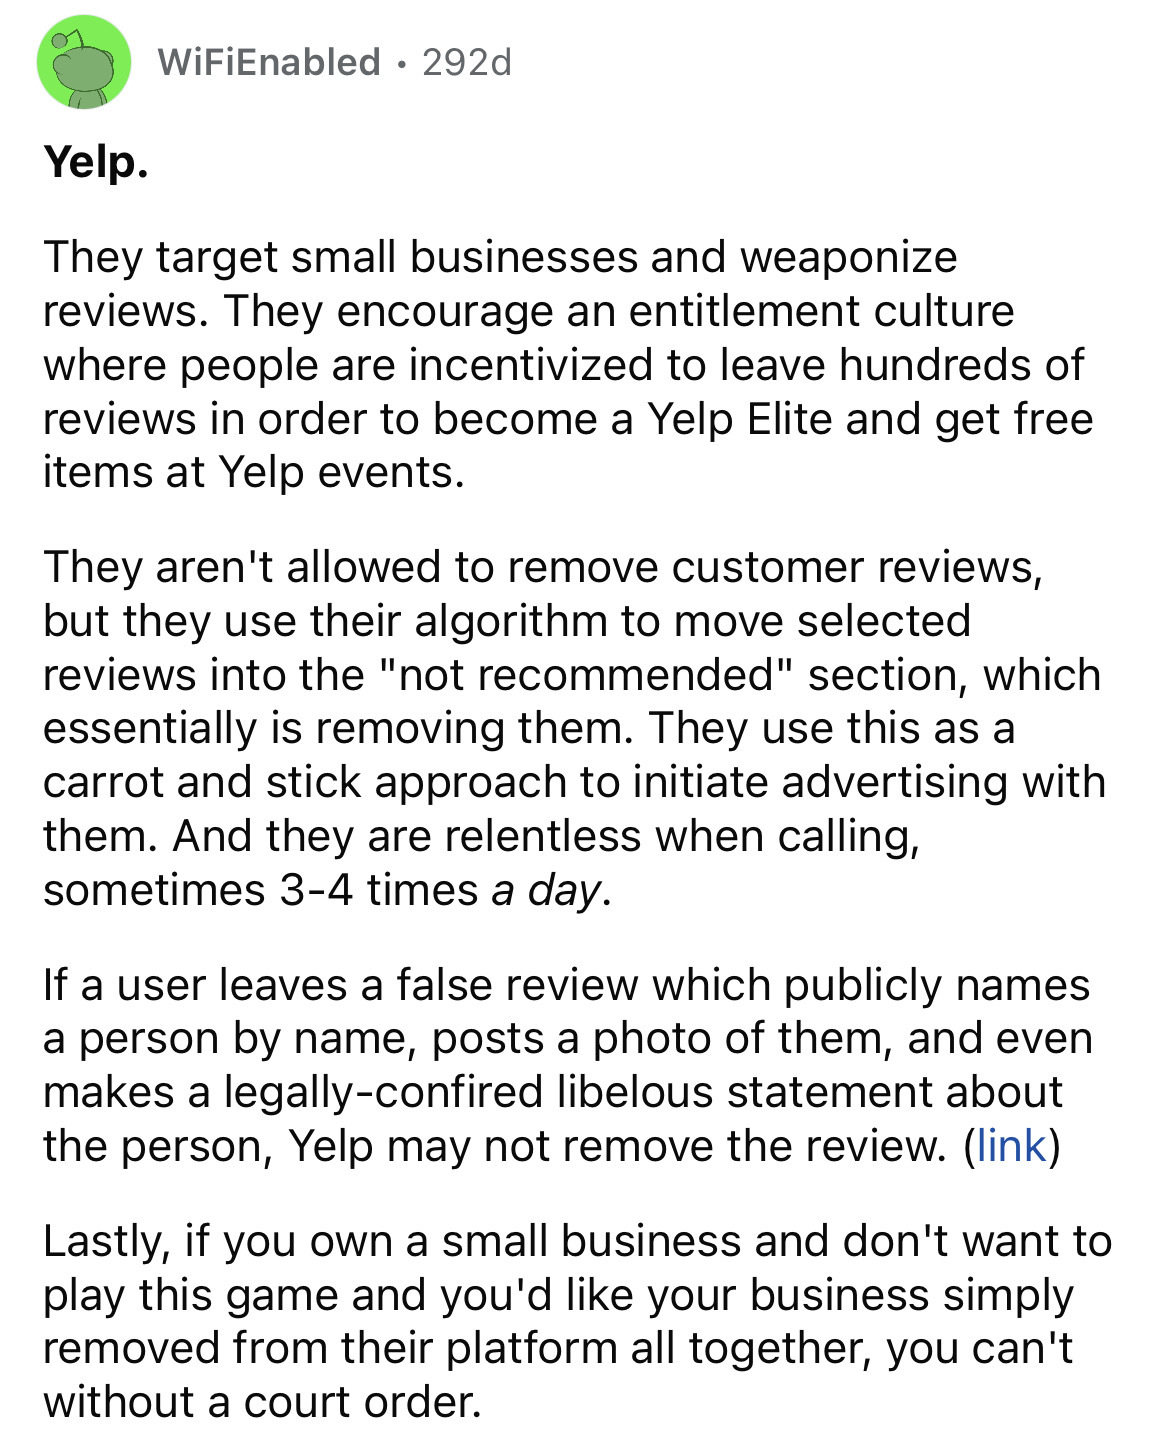 document - Yelp. WiFi Enabled 292d They target small businesses and weaponize reviews. They encourage an entitlement culture where people are incentivized to leave hundreds of reviews in order to become a Yelp Elite and get free items at Yelp events. They